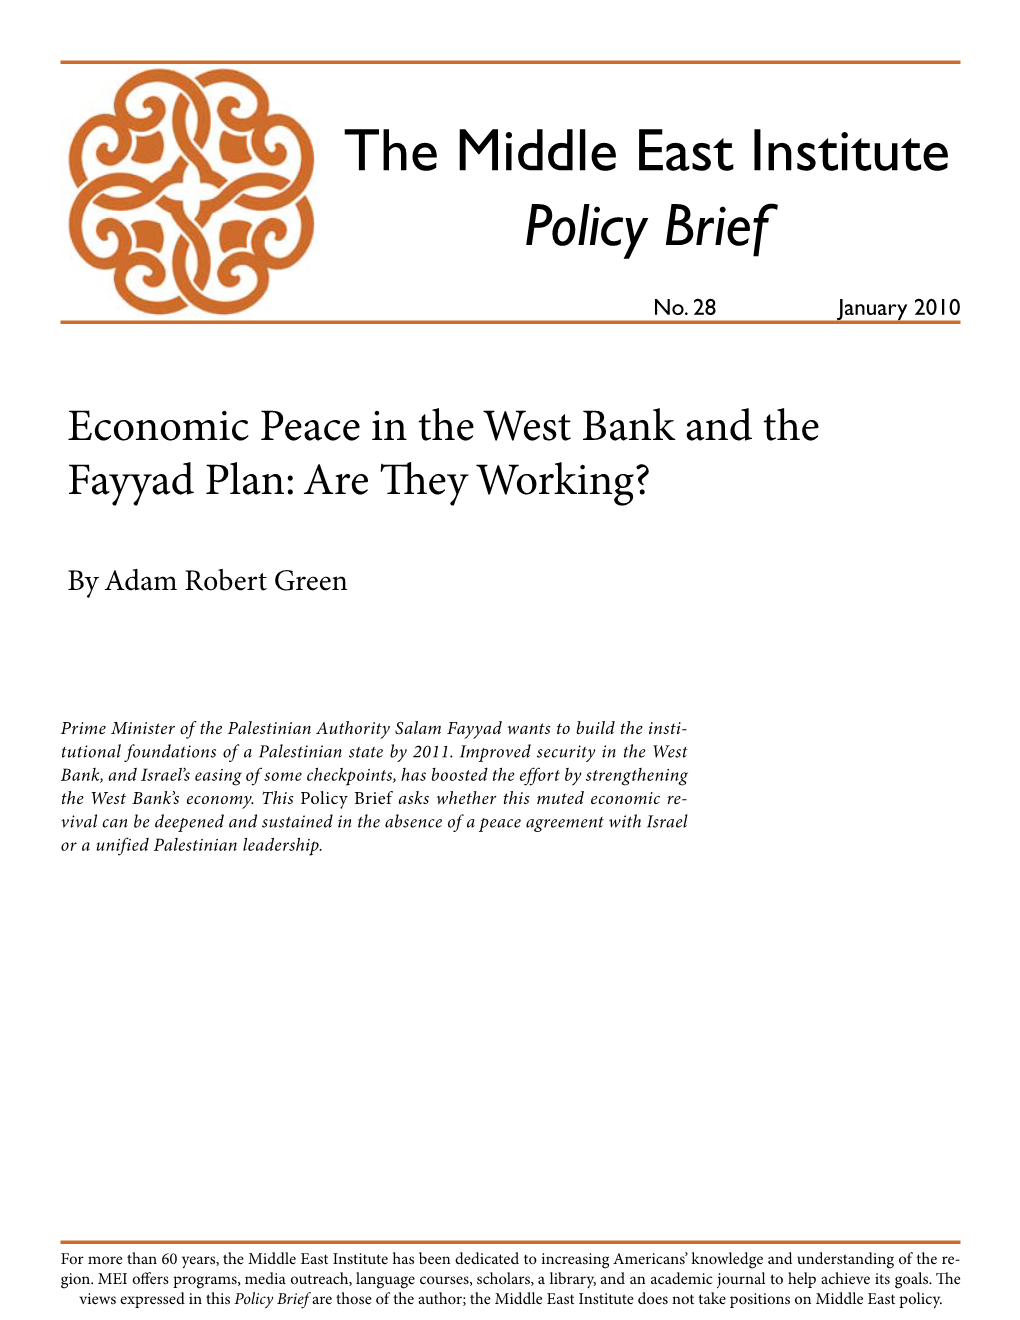 Economic Peace in the West Bank and the Fayyad Plan: Are They Working?